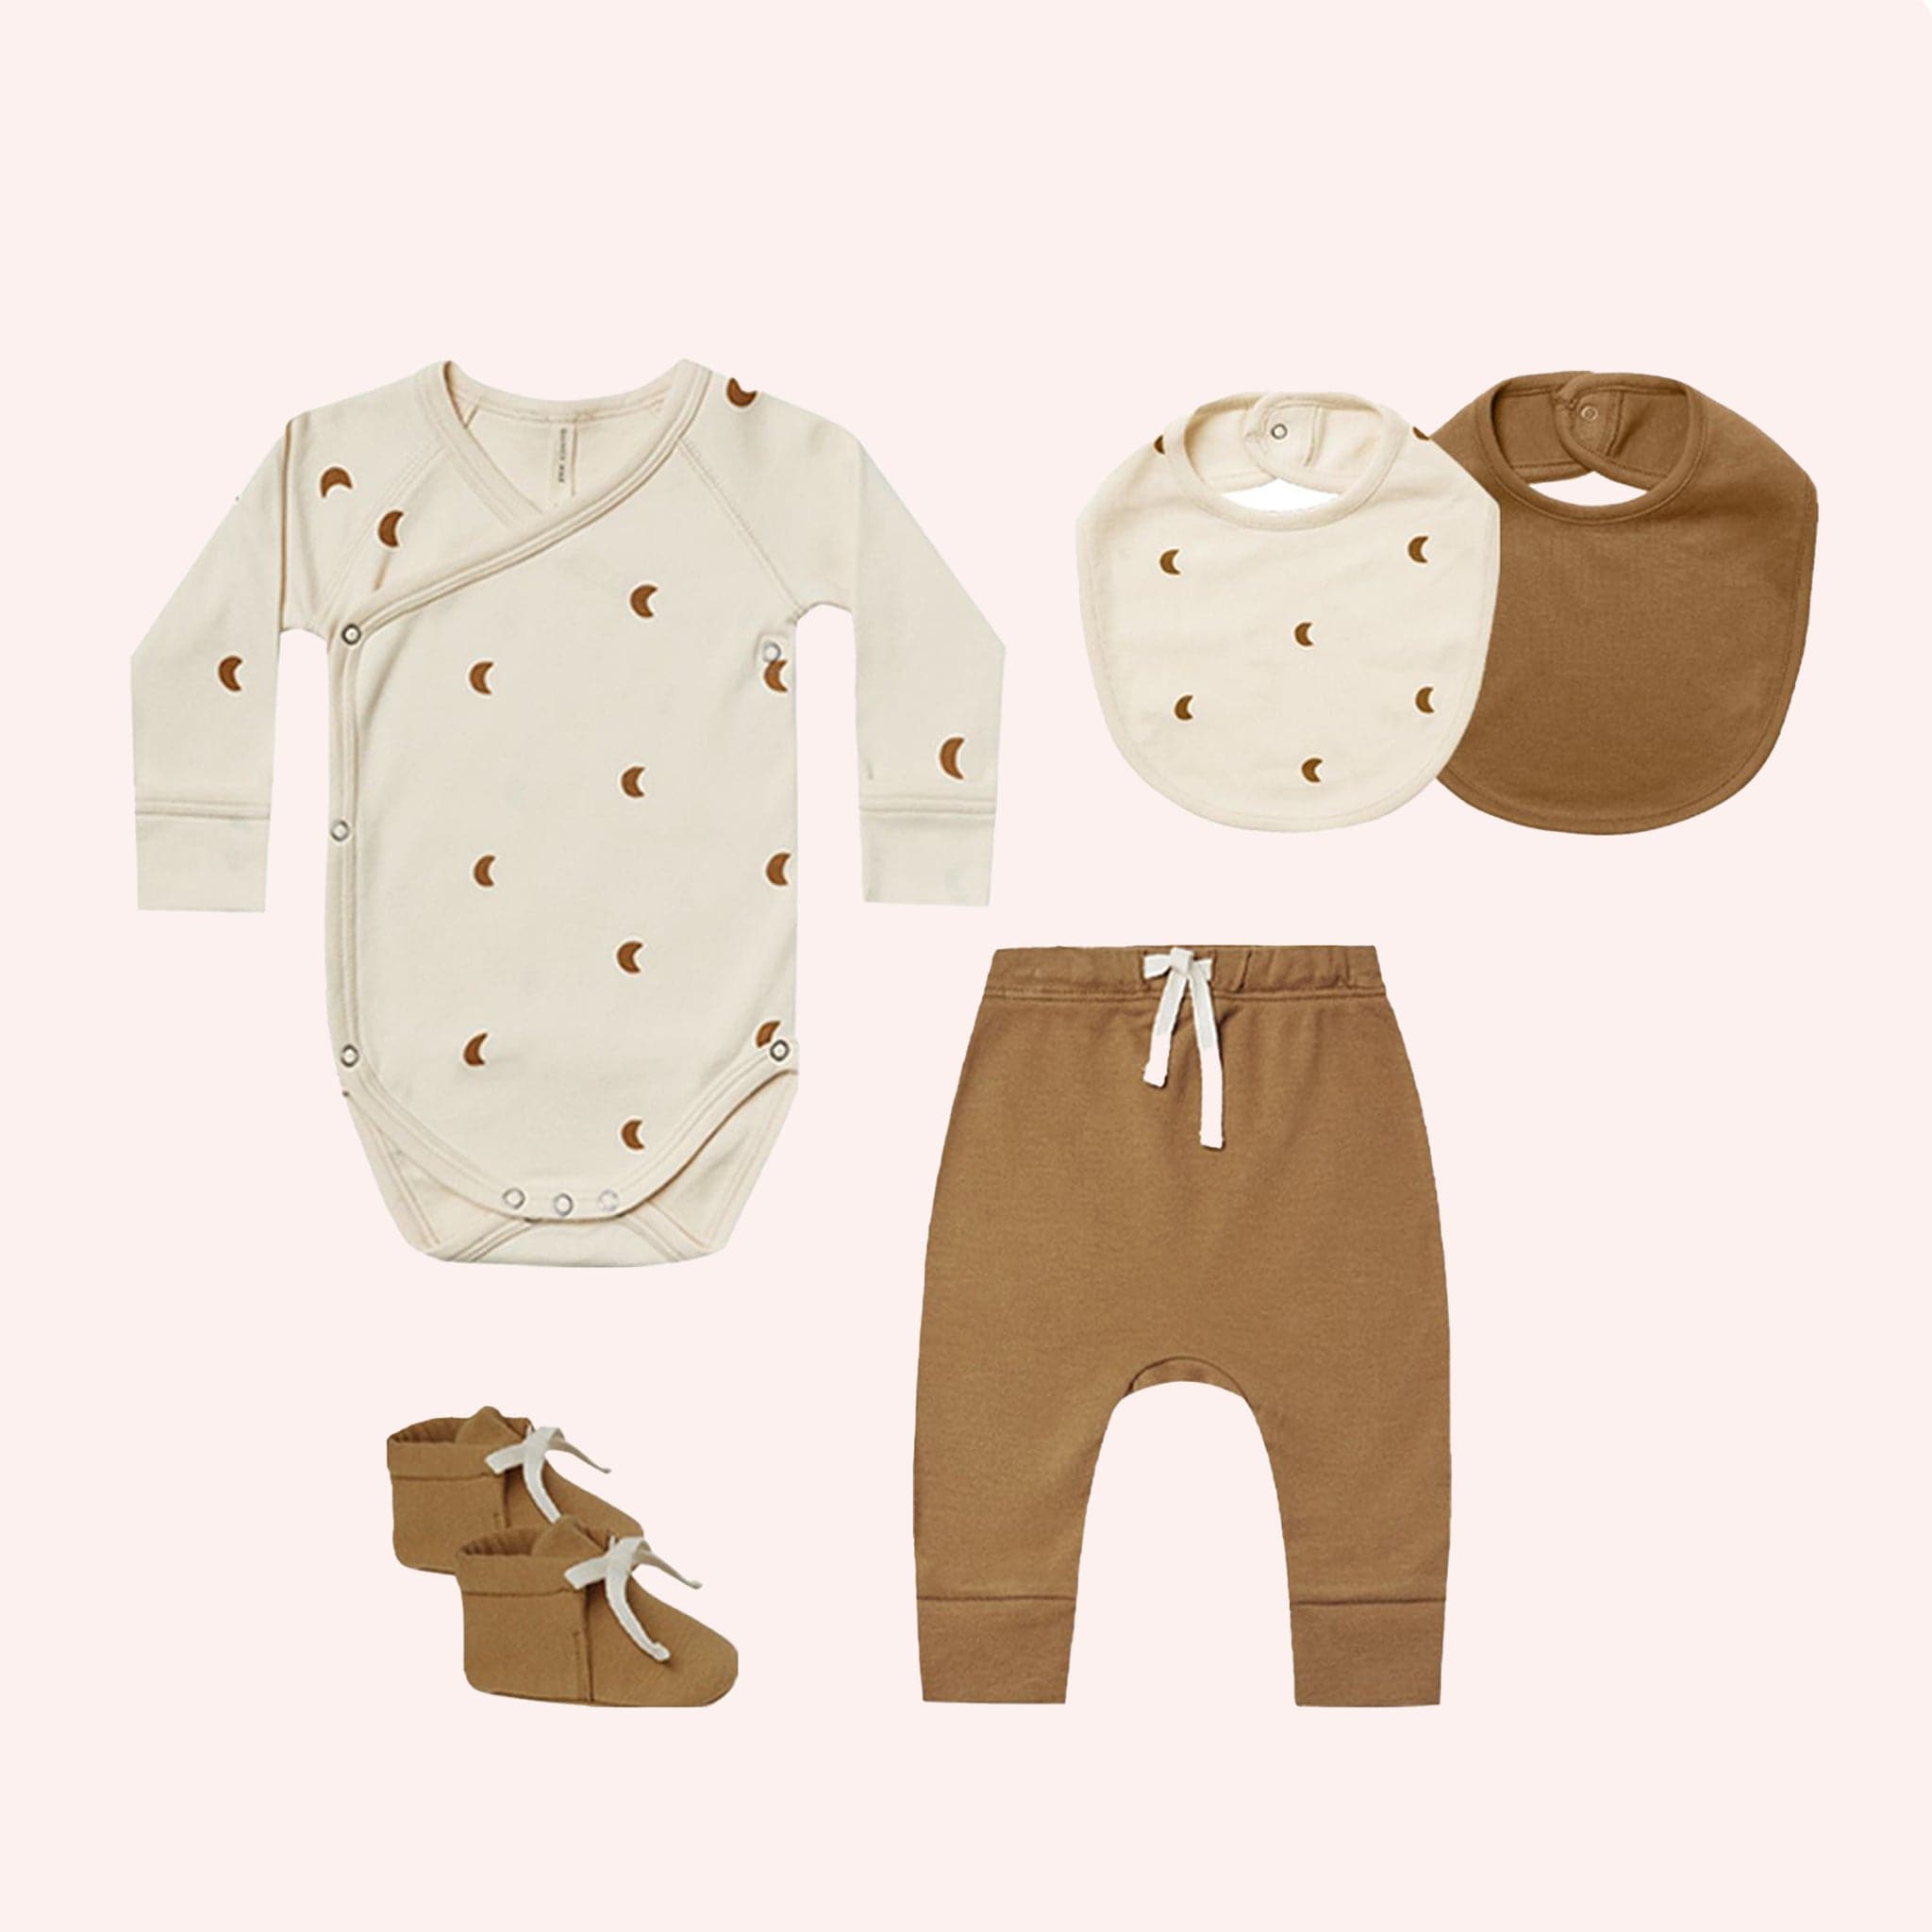 A five piece baby gift set. Ivory long sleeved onesie with brown crescent moon patterns. Ivory bib with brown crescent moon pattern. Brown bib. Brown joggers with white drawstring. Brown booties with white laces.